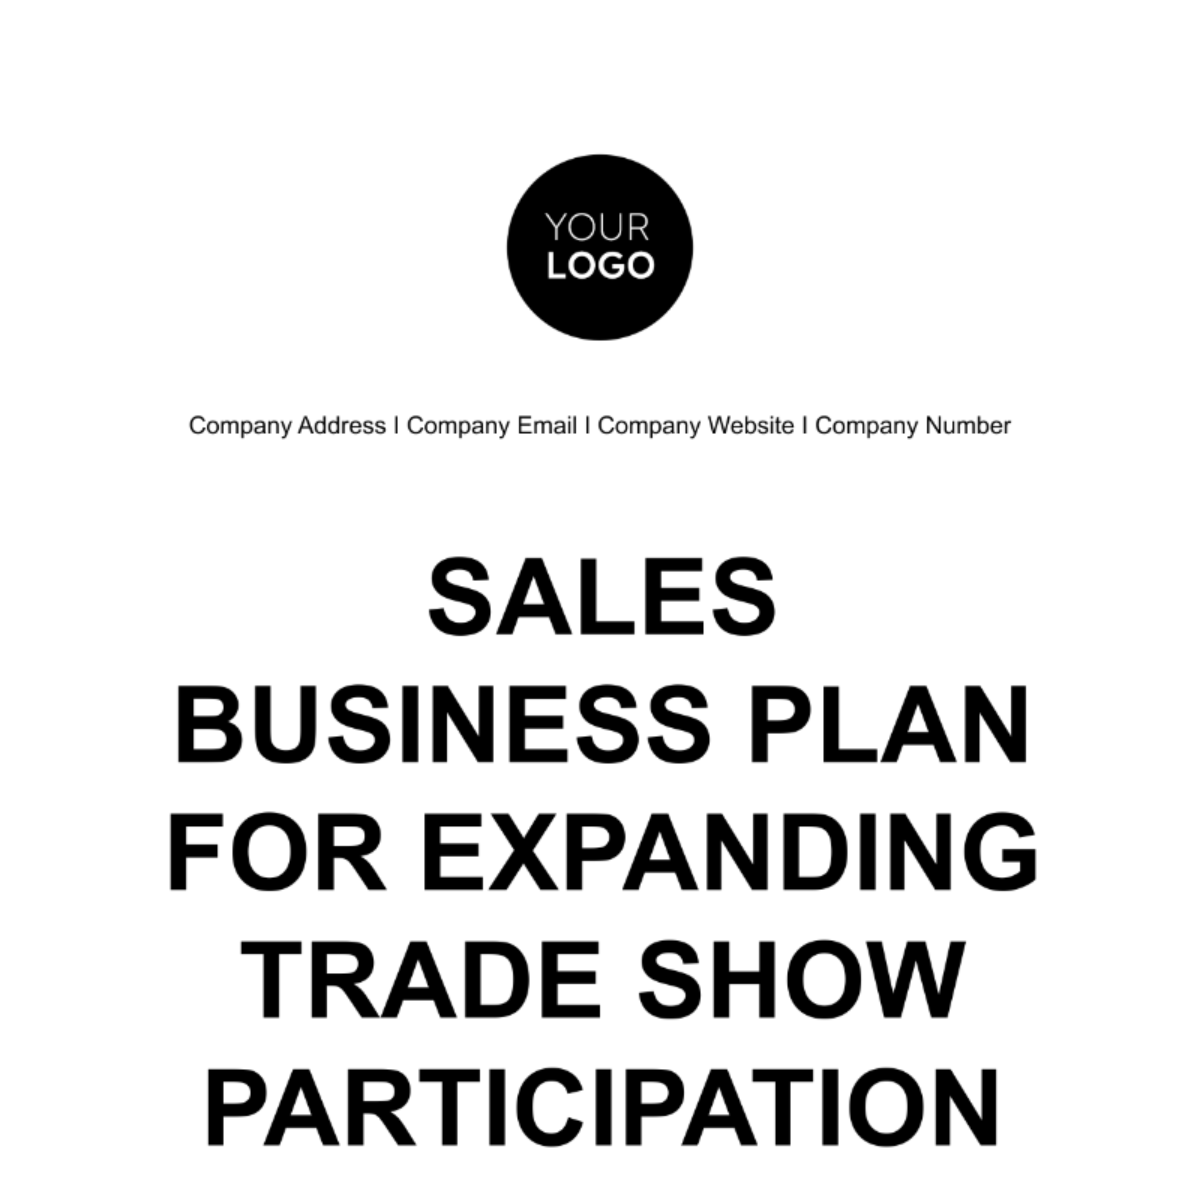 Free Sales Business Plan for Expanding Trade Show Participation Template